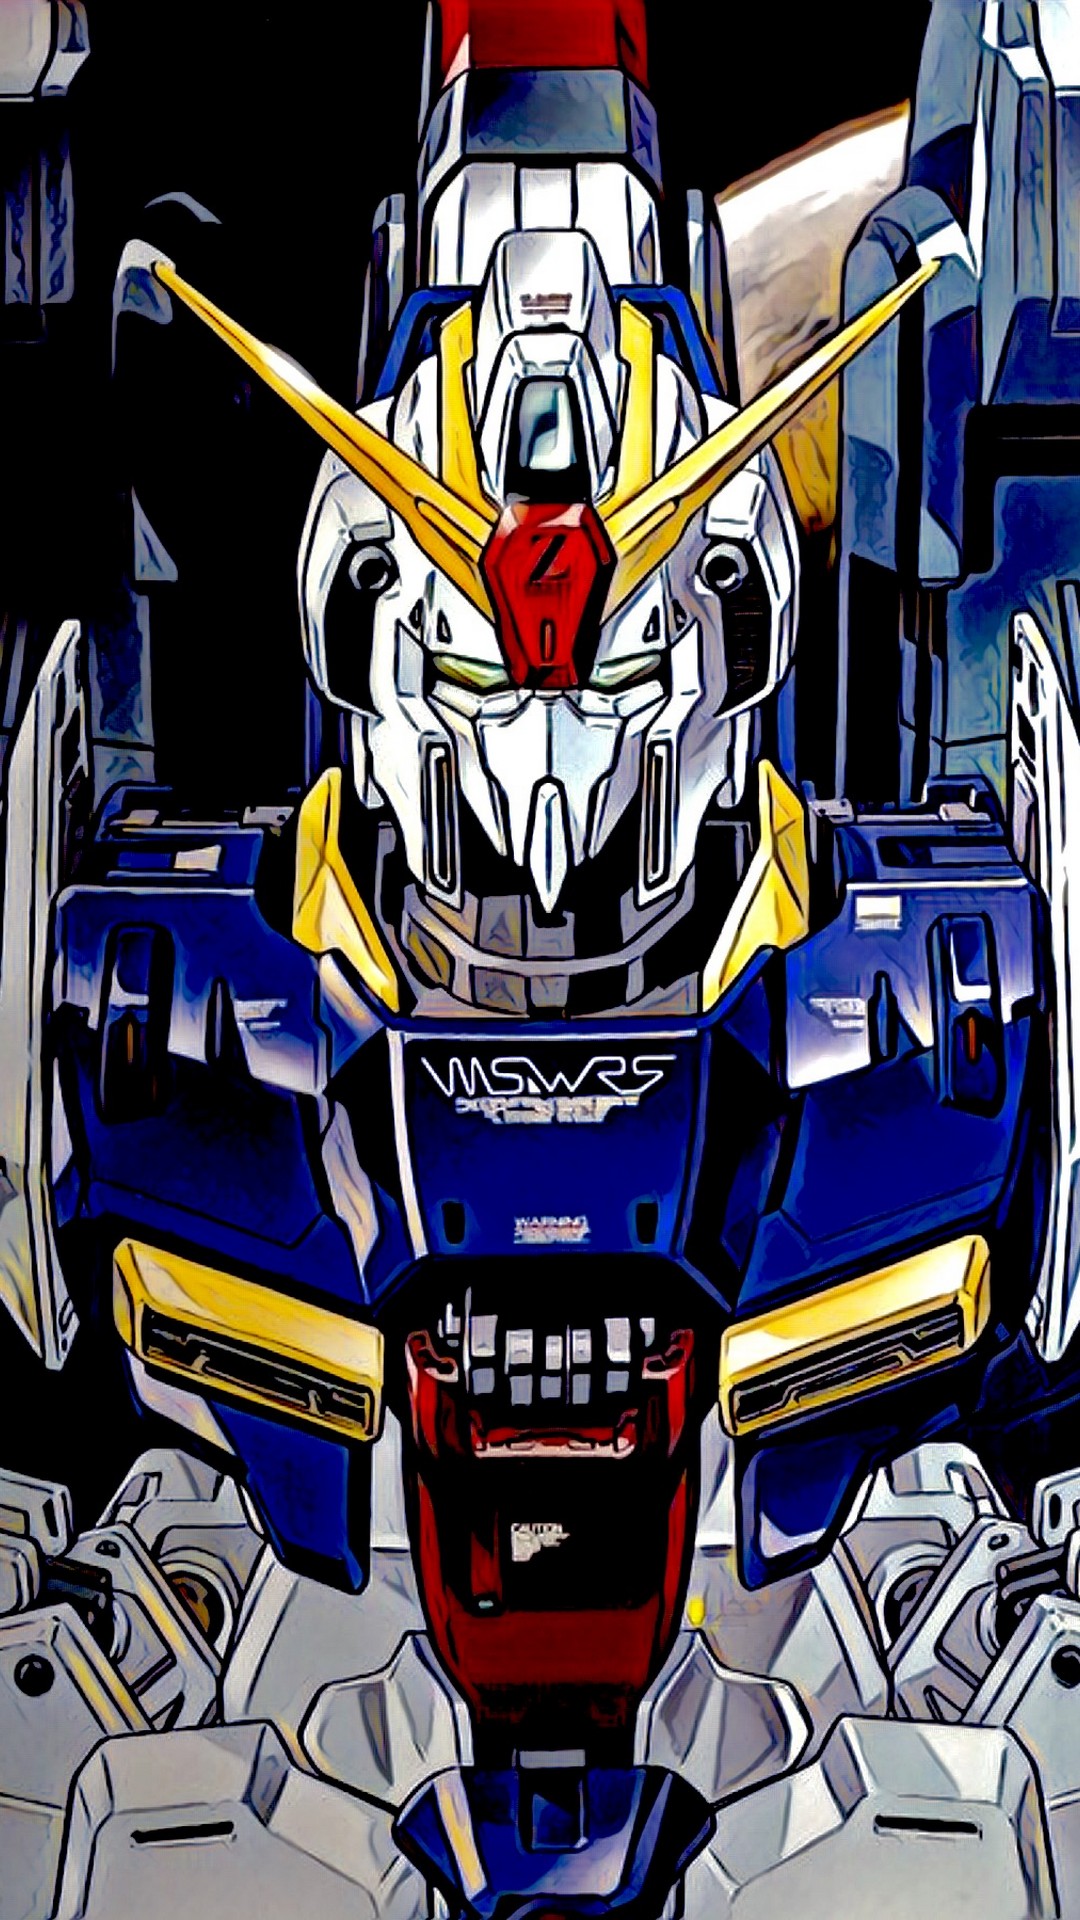 Gundam iPhone X Wallpaper HD with high-resolution 1080x1920 pixel. Download all Mobile Wallpapers and Use them as wallpapers for your iPhone, Tablet, iPad, Android and other mobile devices